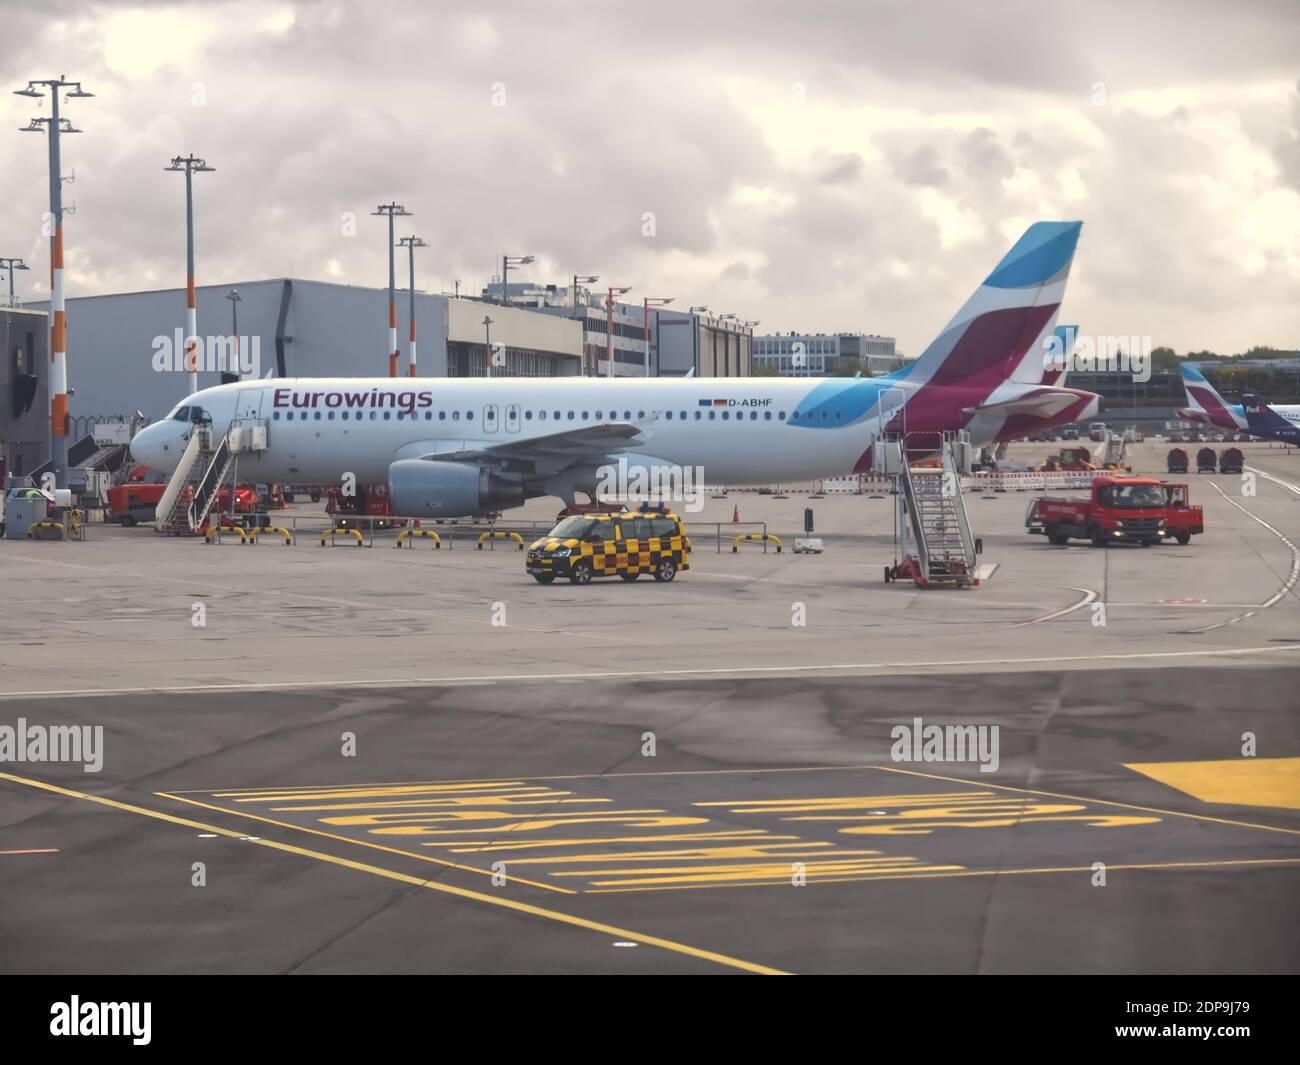 Eurowings airplane at Duesseldorf airport in park position Stock Photo